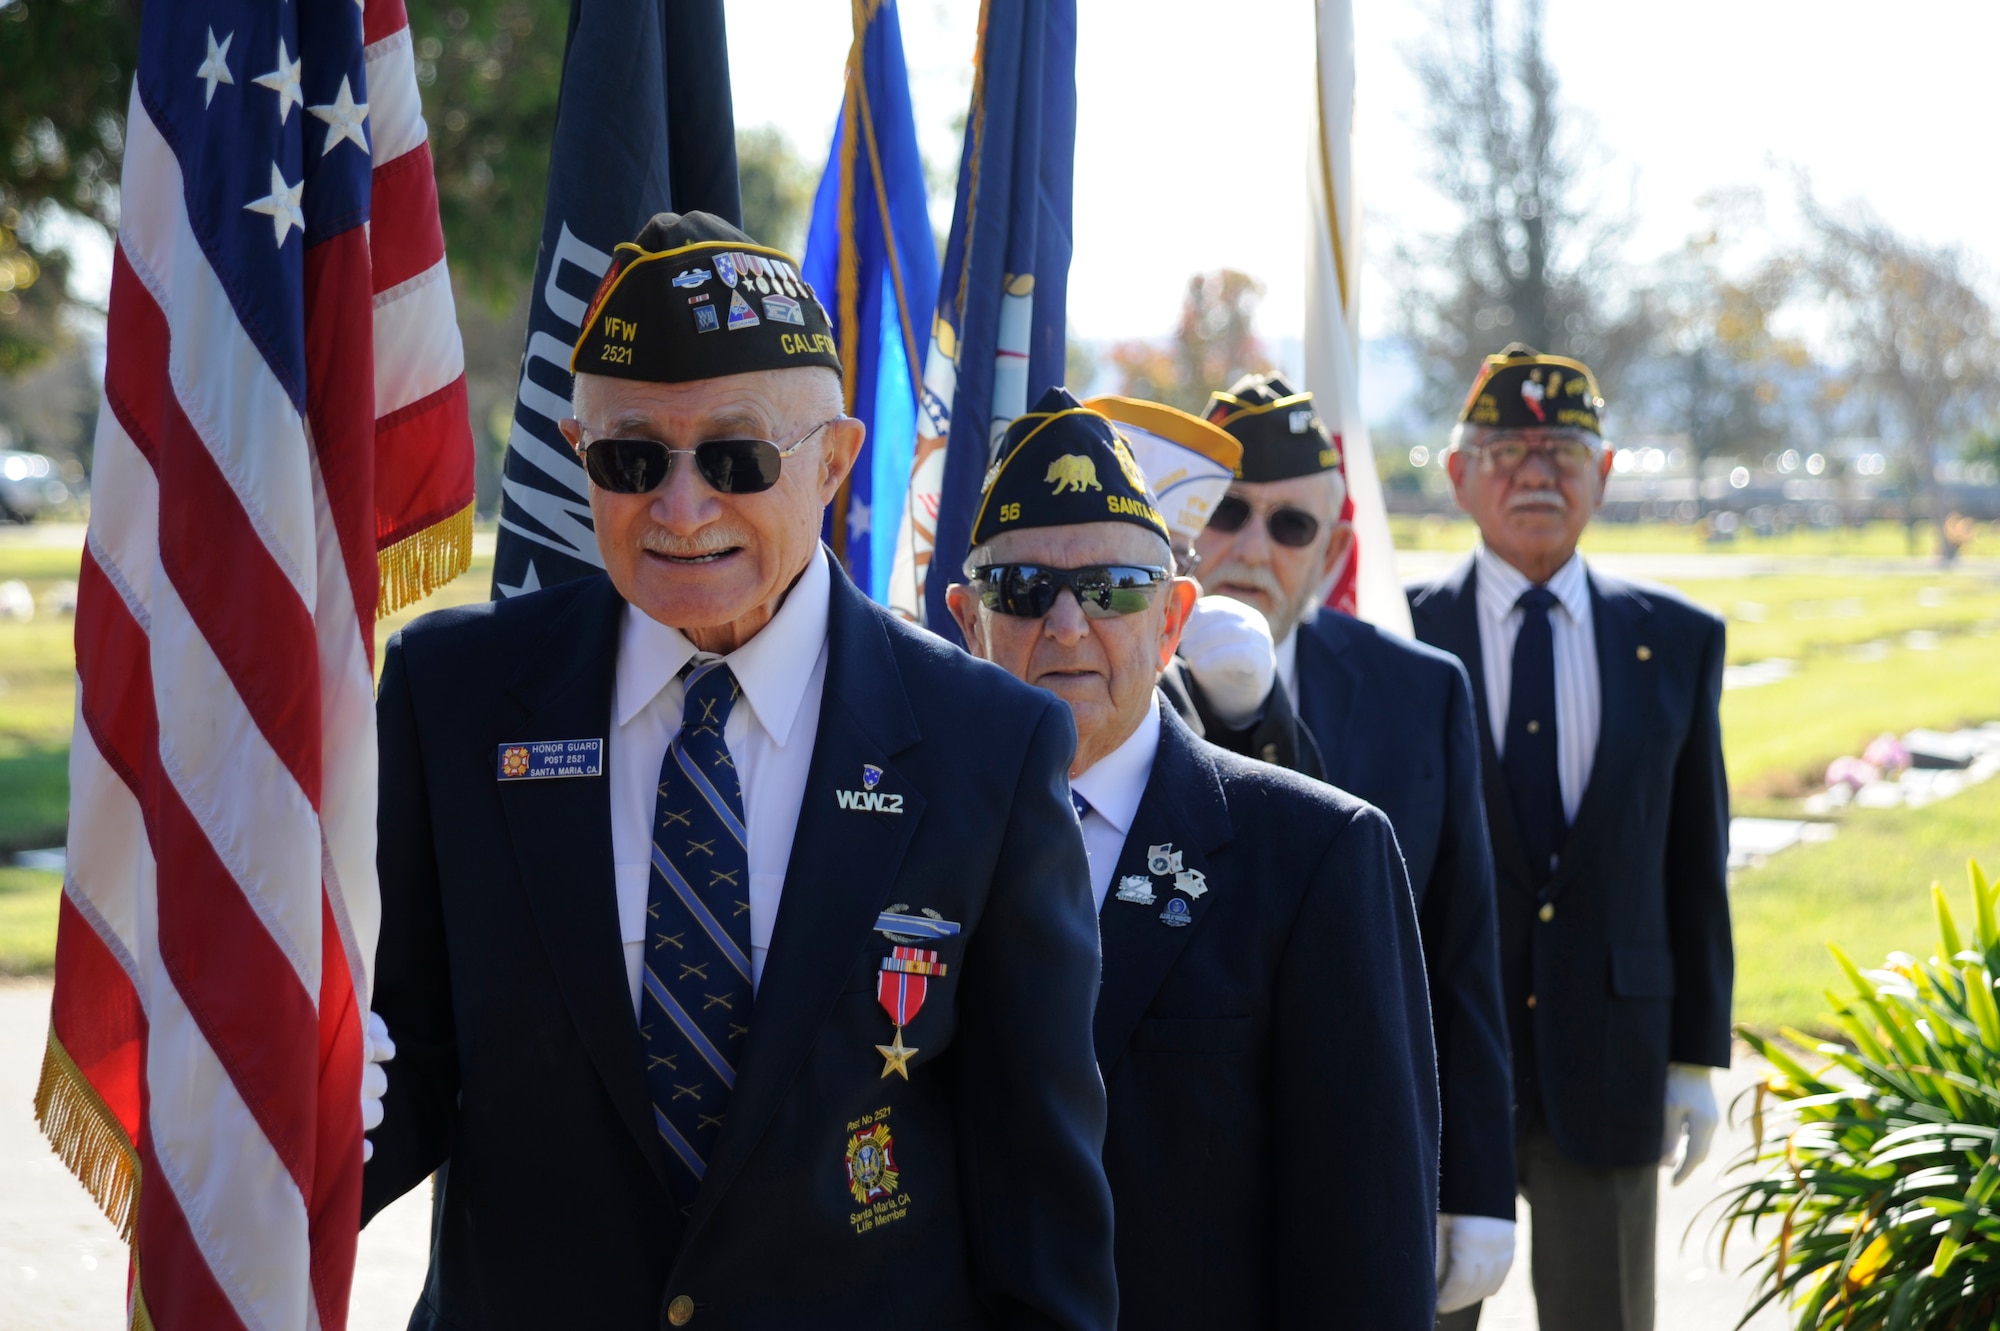 The City of Santa Maria celebrates Veterans Day, Nov. 11, 2015, Santa Maria, Calif. We celebrate Veterans Day to recognize military members, past and present, who have served their country. (U.S. Air Force photo by Senior Airman Ian Dudley/Released)